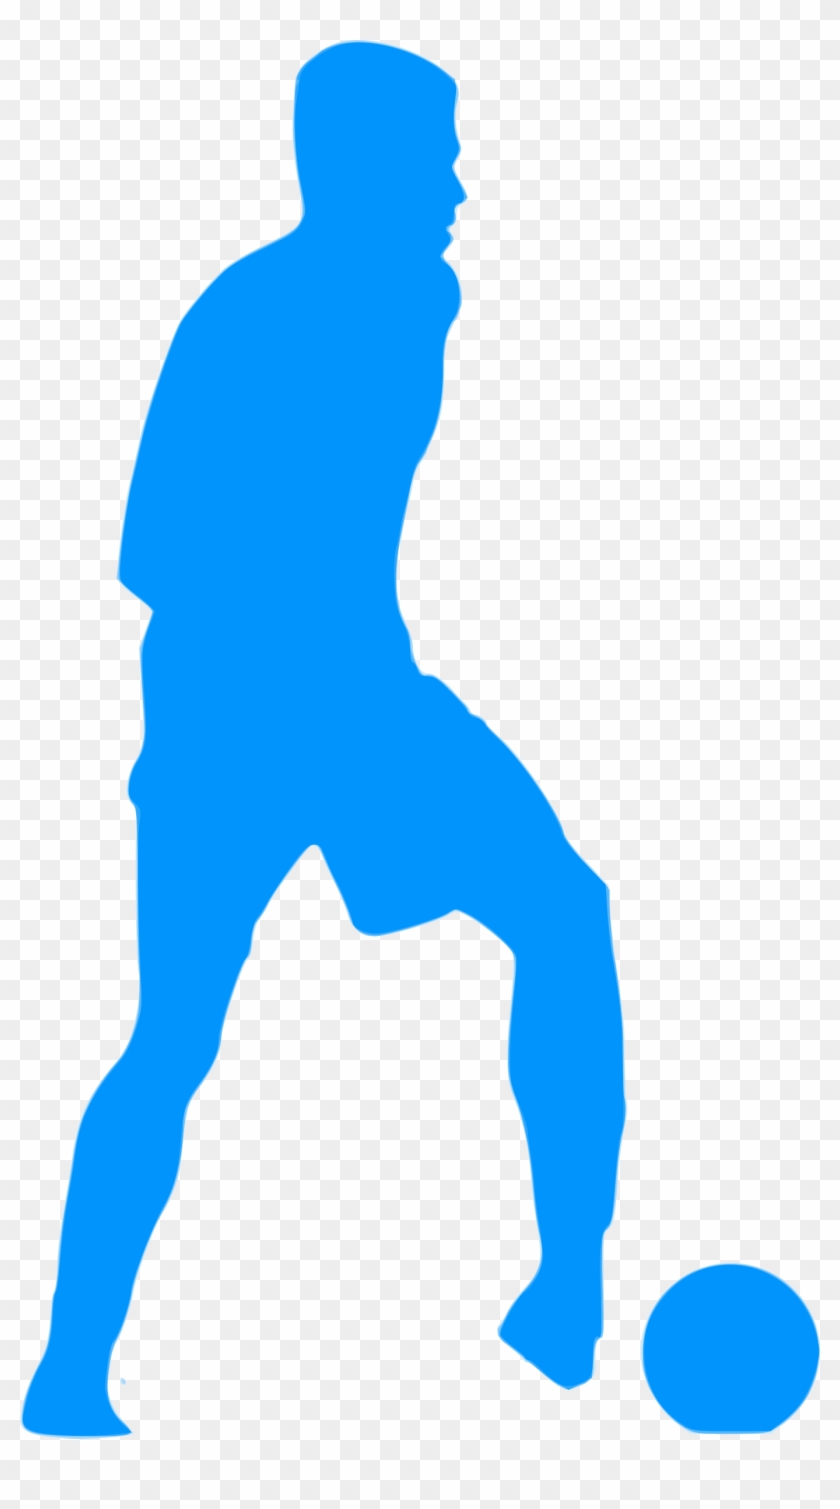 Silhouette Football 21 - Football Player In Vector Png #317537